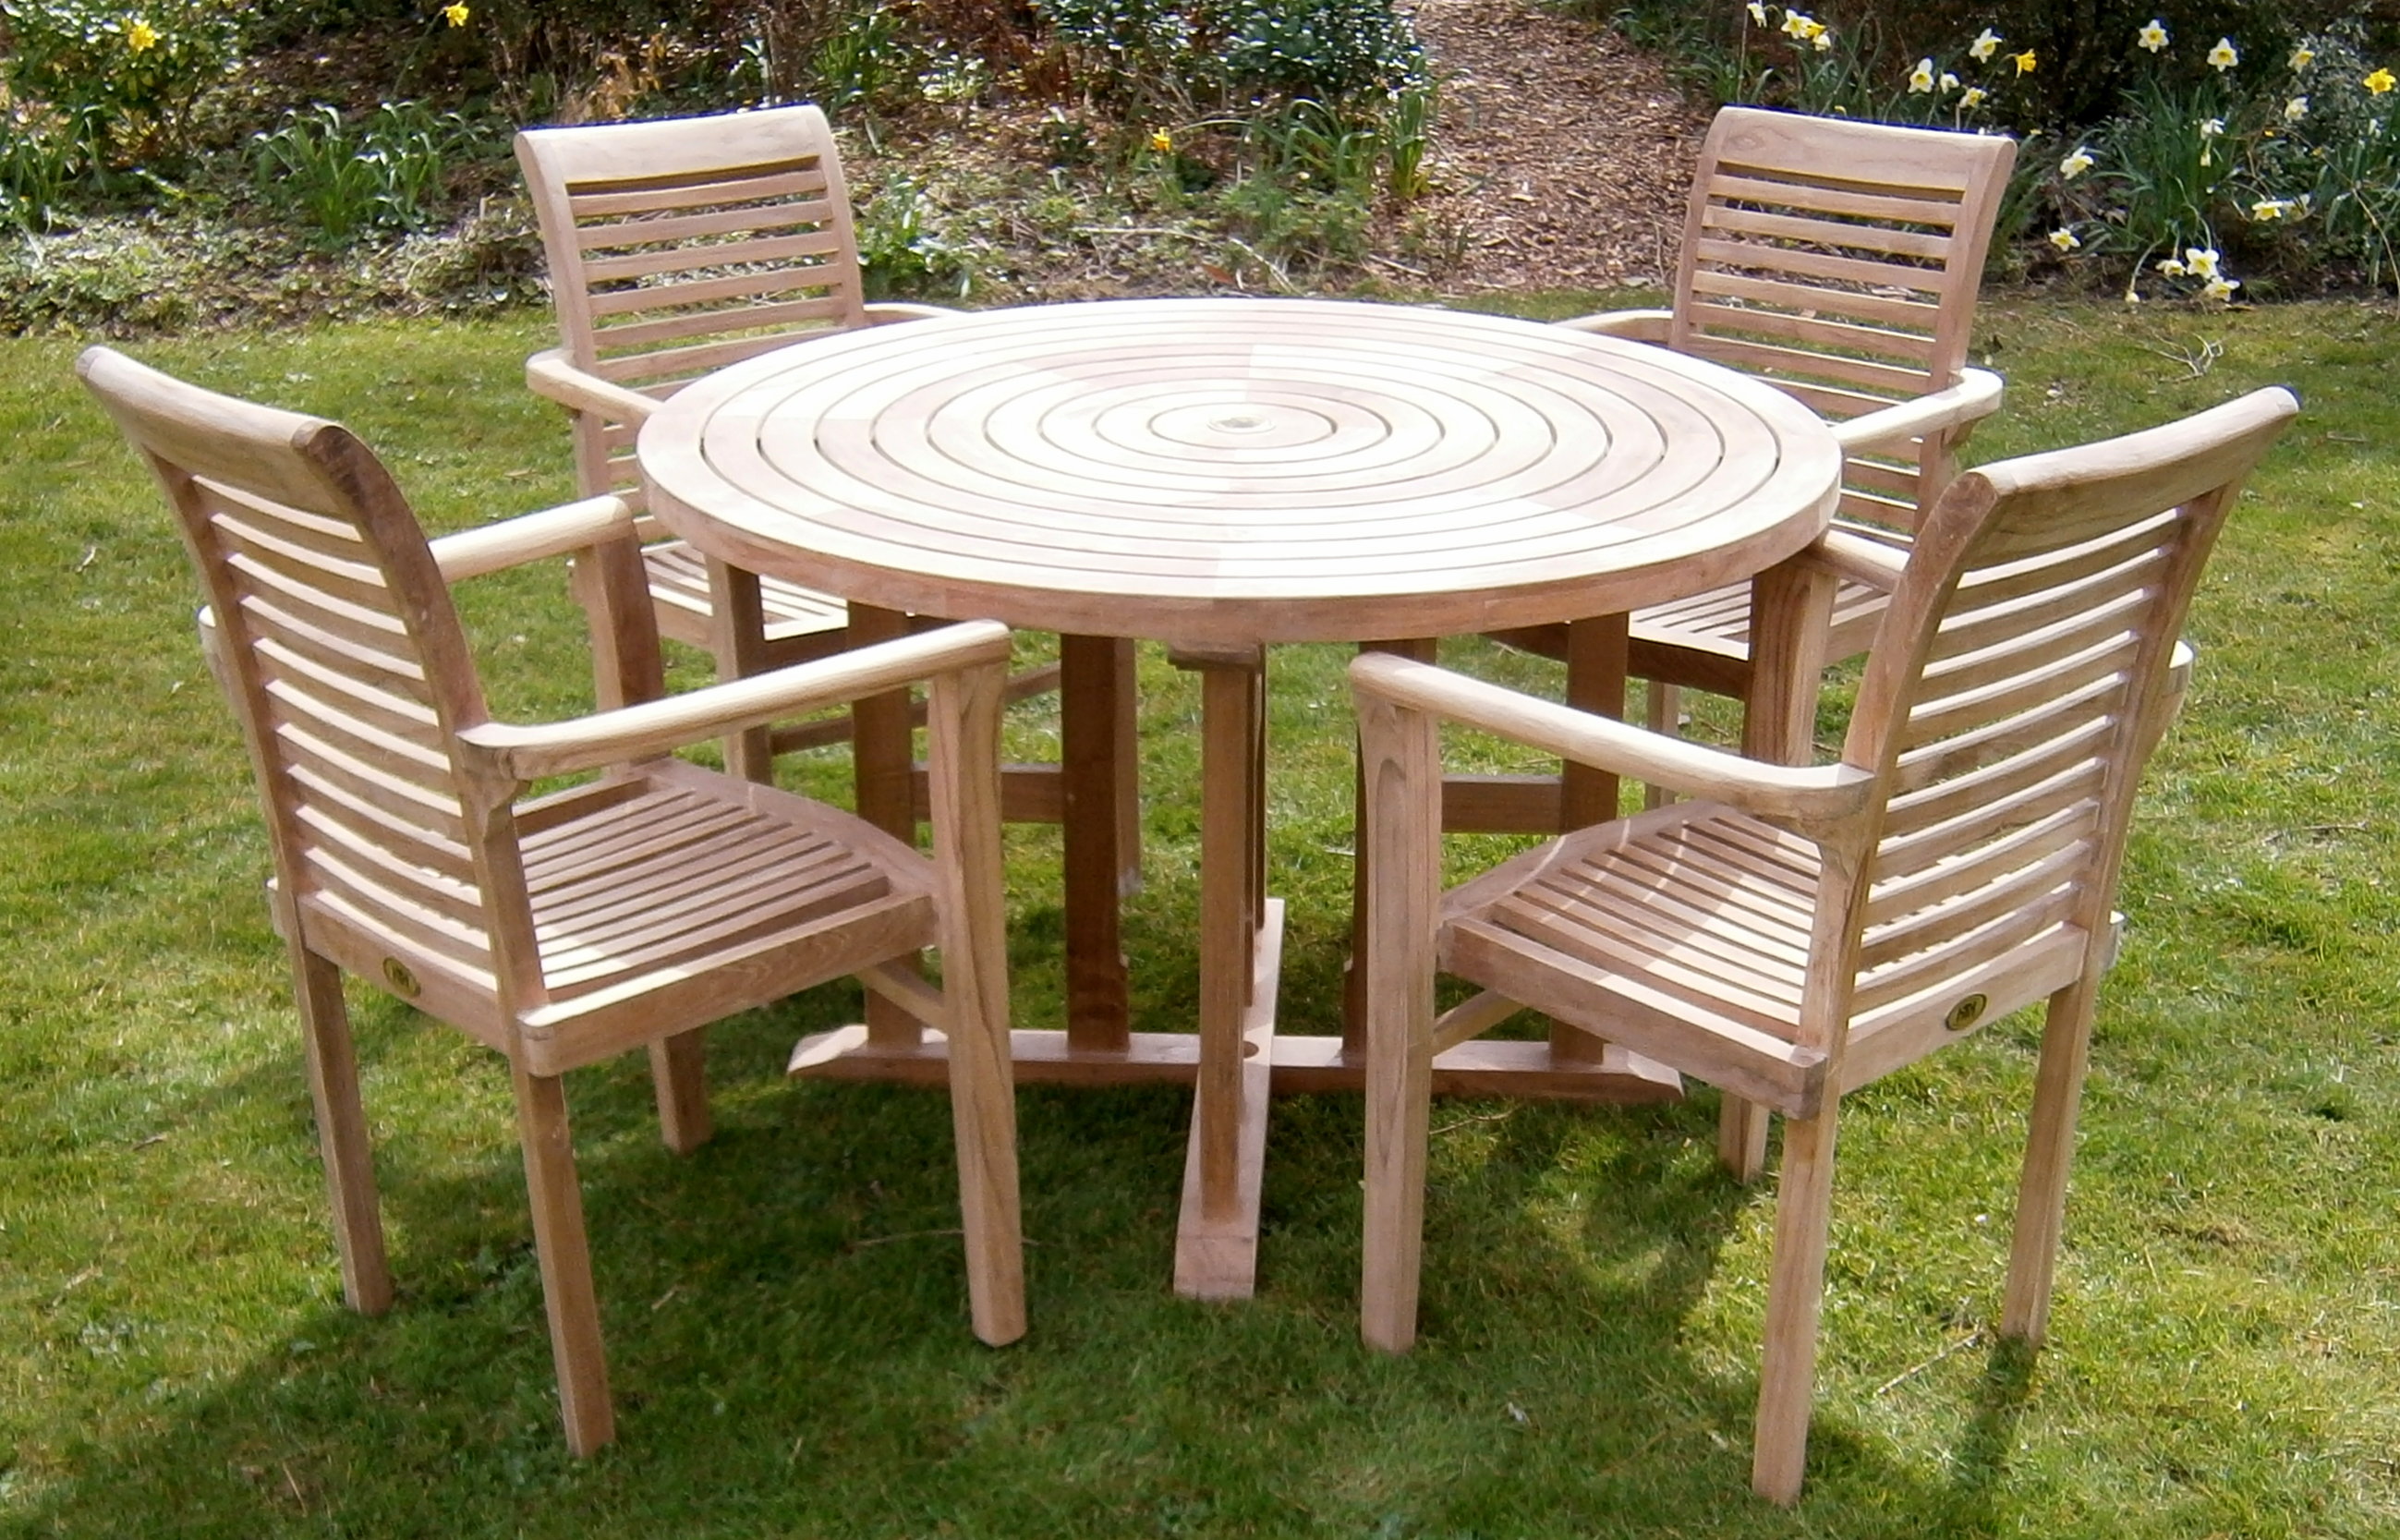 Turnworth Teak Ring Table and Chairs - Chairs and Tables UK - Teak